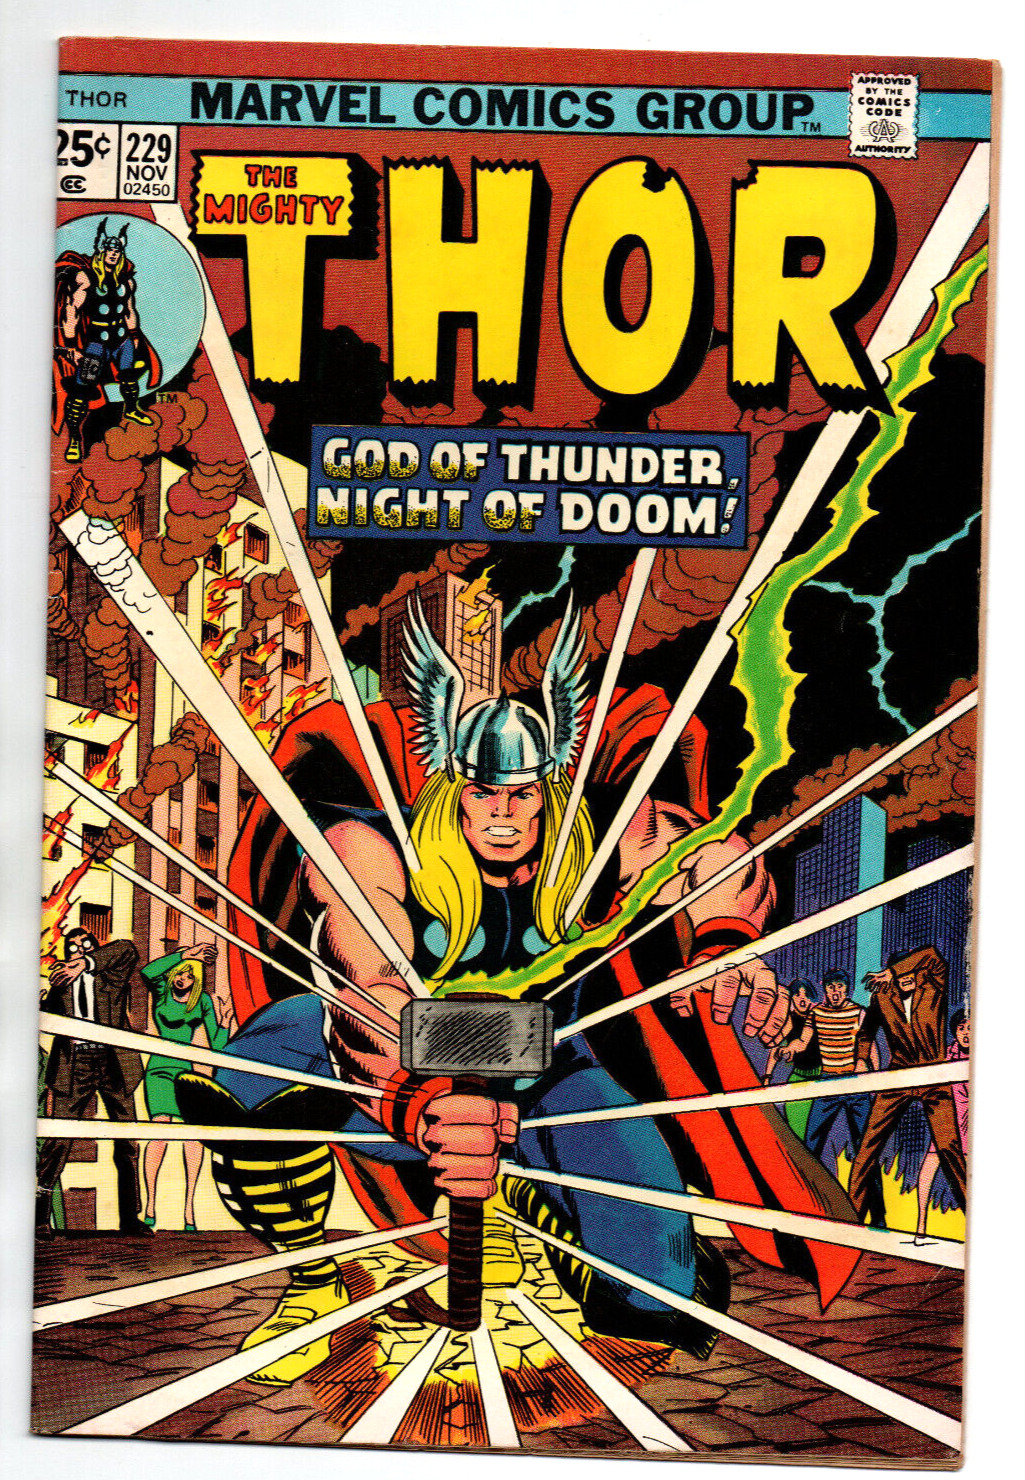 The Mighty Thor #229 - Hulk #181 Wolverine ad - 1974 - FN/VF